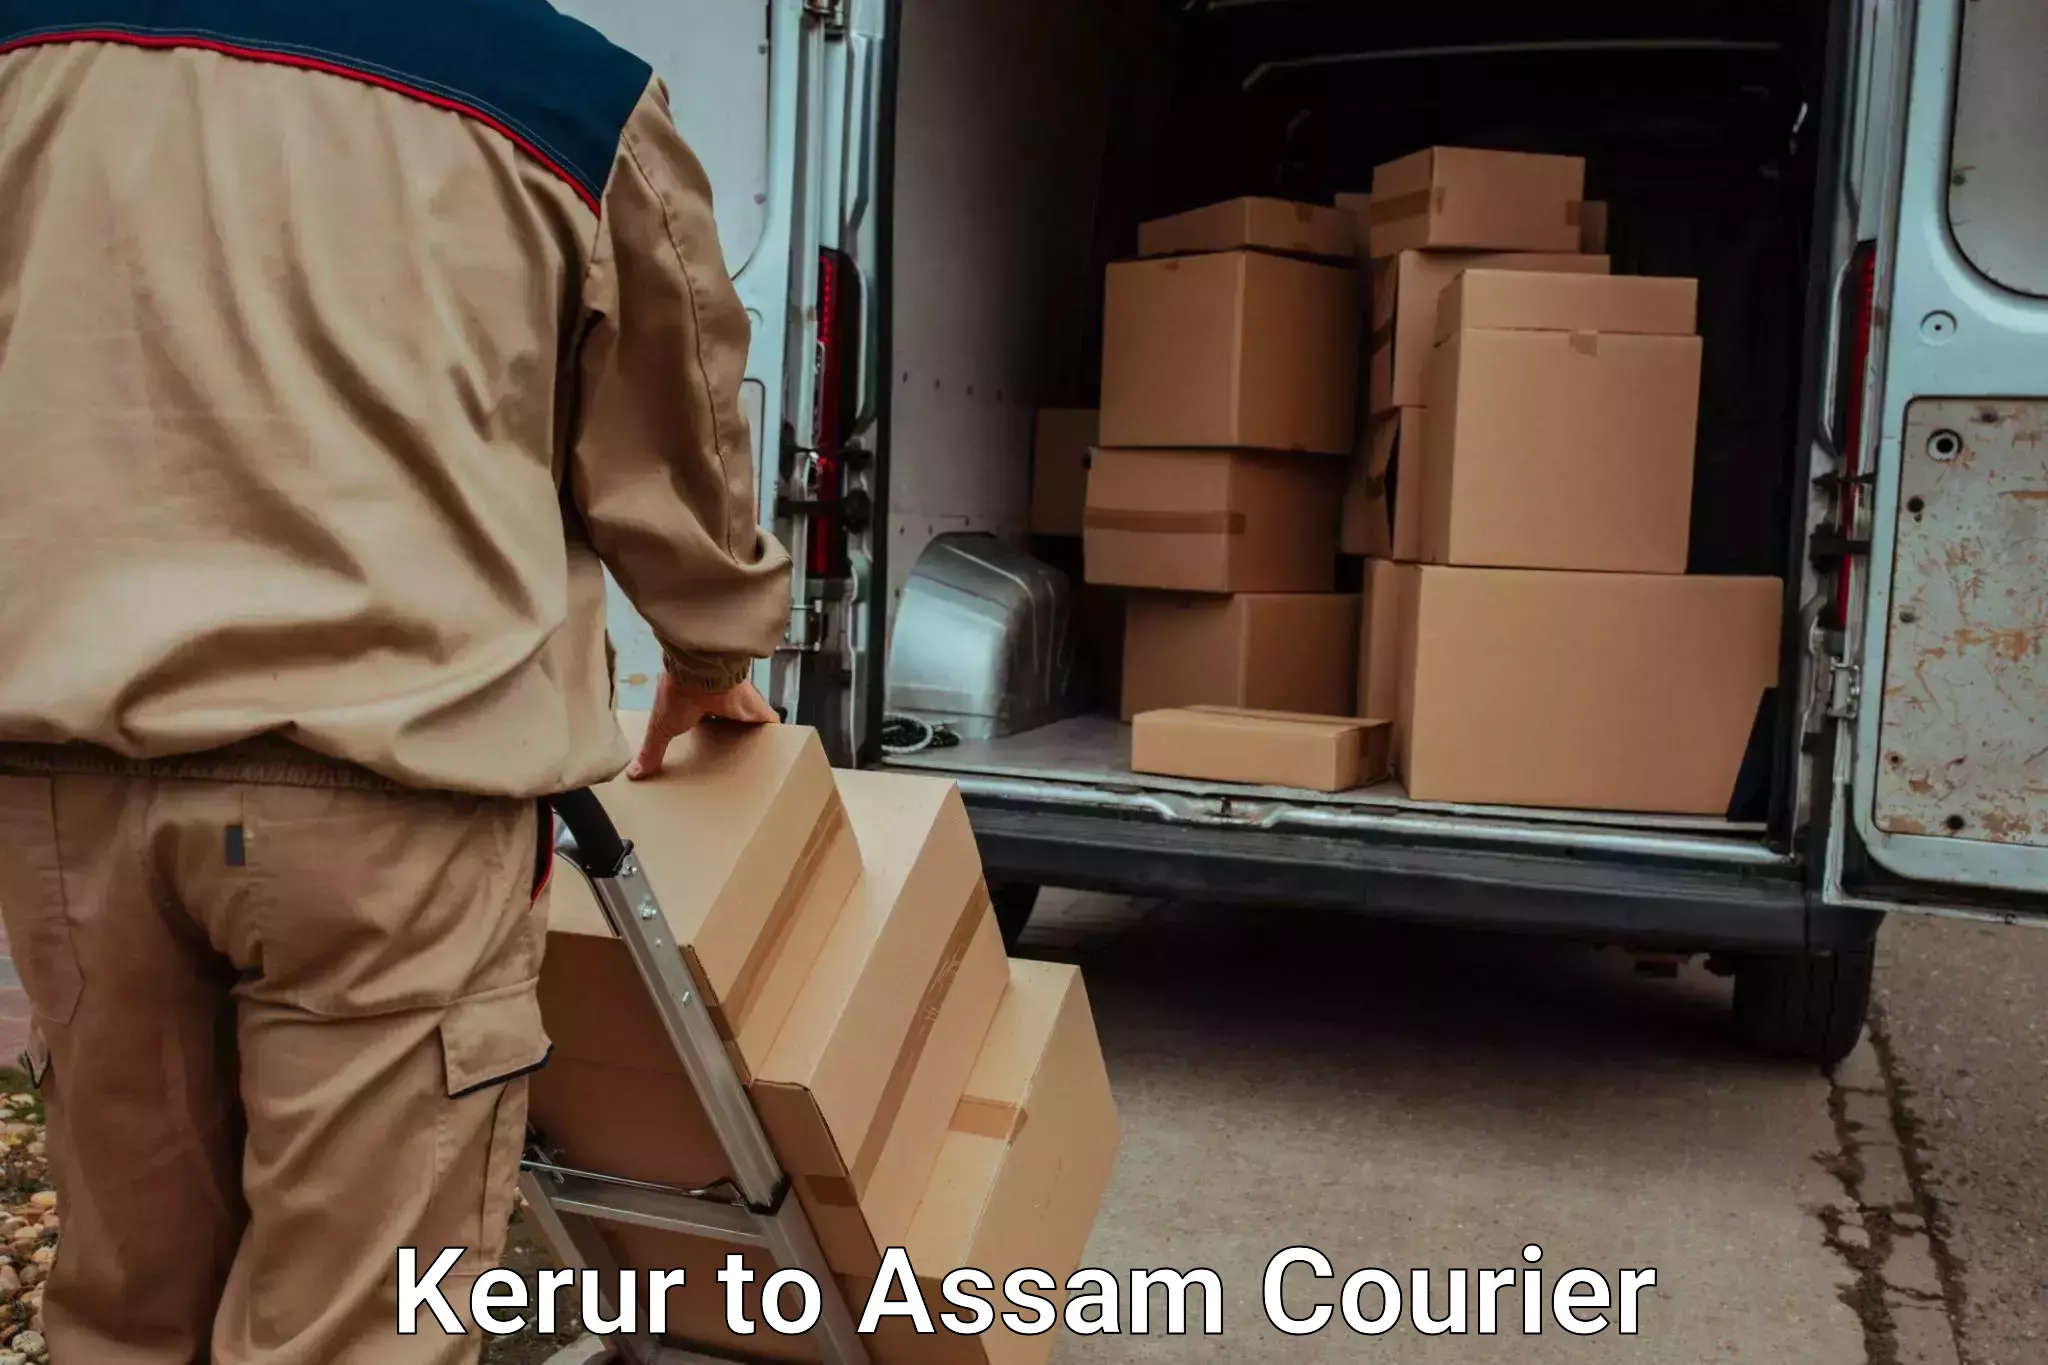 Personal luggage delivery in Kerur to Guwahati